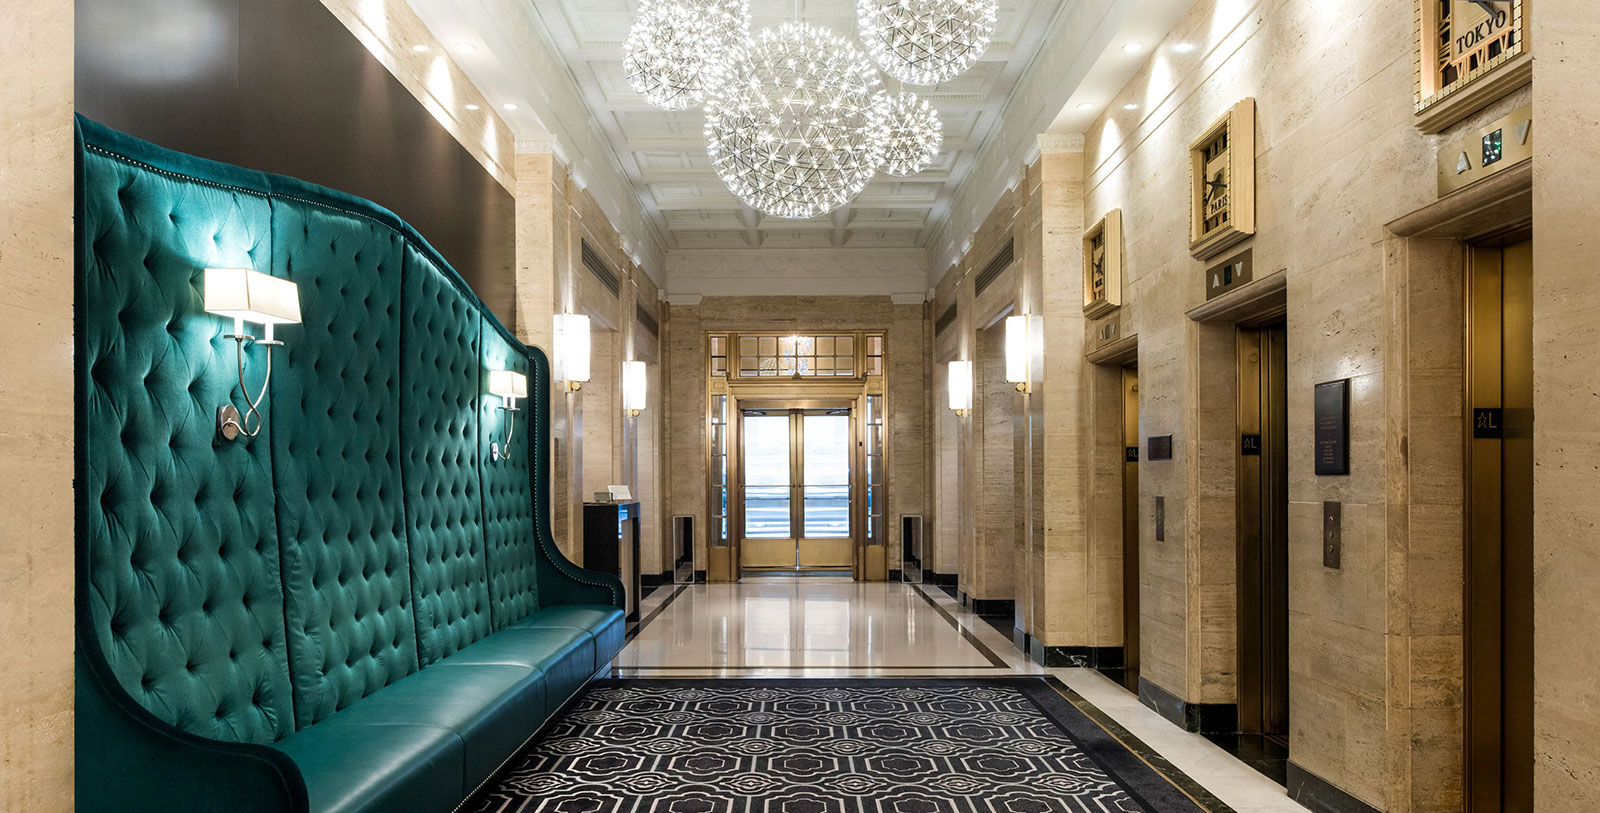 Discover French-inspired details throughout the Sofitel Washington DC Lafayette Square, as this historic hotel was designed as a French-inspired oasis in Washington, DC.